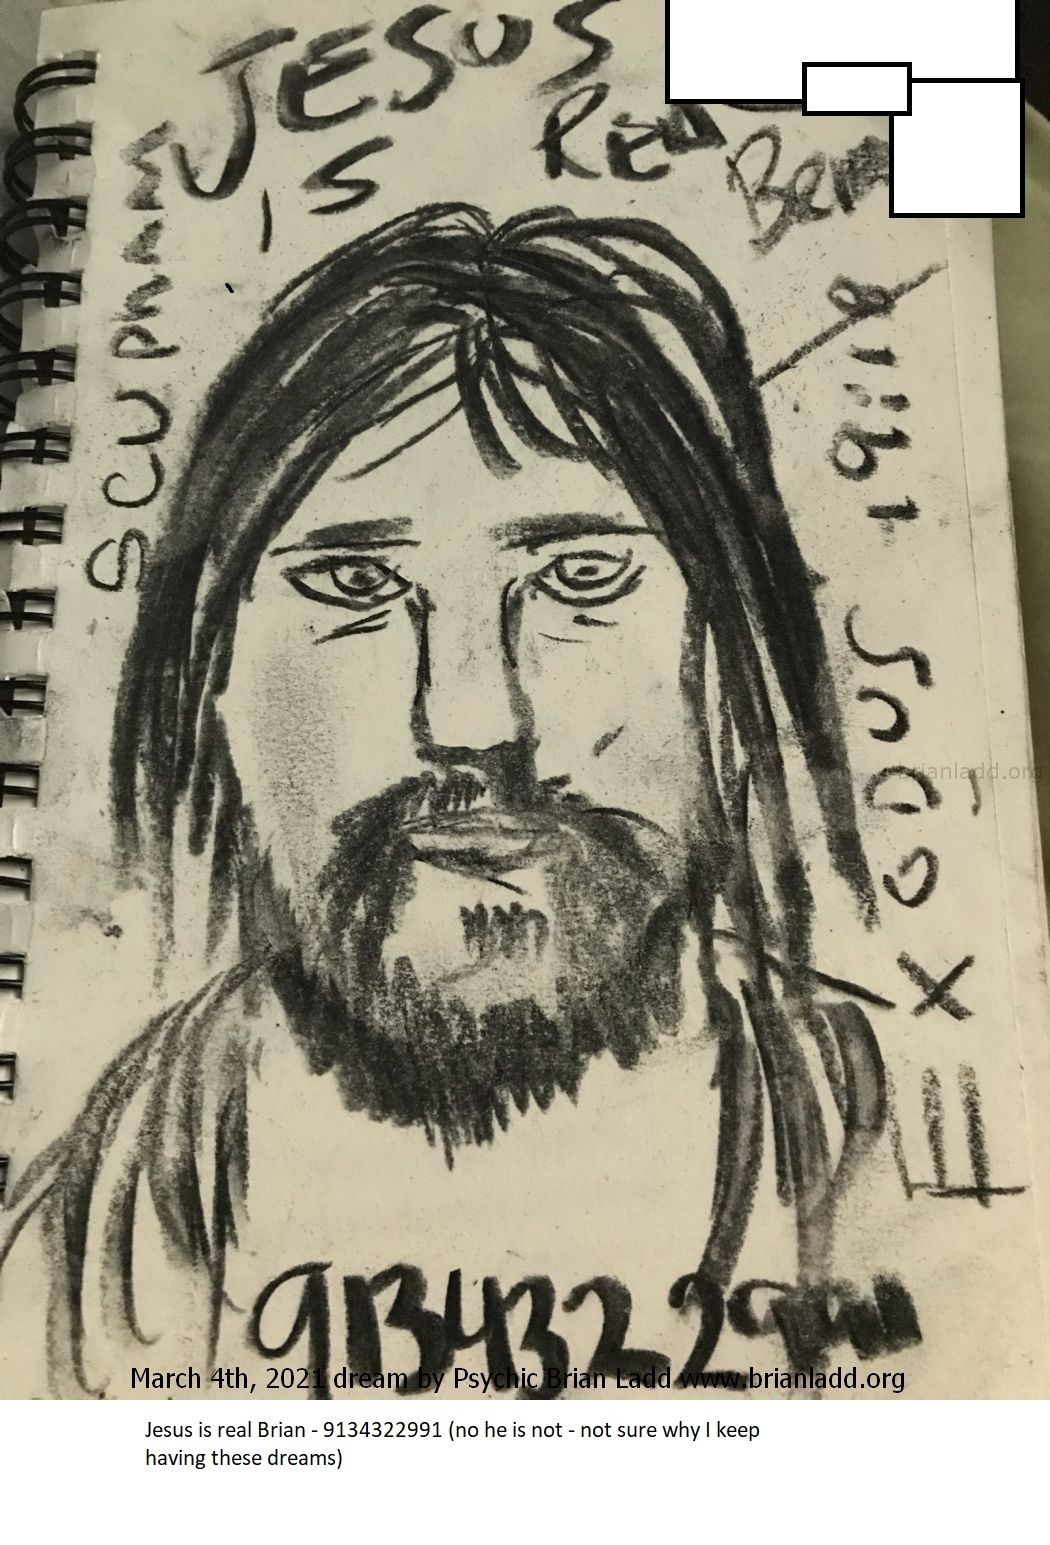 14561 3 March 2021 4 - Jesus Is Real Brian - 9134322991 Said A Dream On March 4th, 2021 - Well 9134322991 Turns Out To B...
Jesus Is Real Brian - 9134322991 Said A Dream On March 4th, 2021 - Well 9134322991 Turns Out To Be A Pubic Phone Number Of A First Baptist Church In Mission Kansas - Not Sure Why This Is Important But What Are The Odds This Number Was A Church?  More At   https://briansprediction.com/Thumbnails.Php?Album=2903
